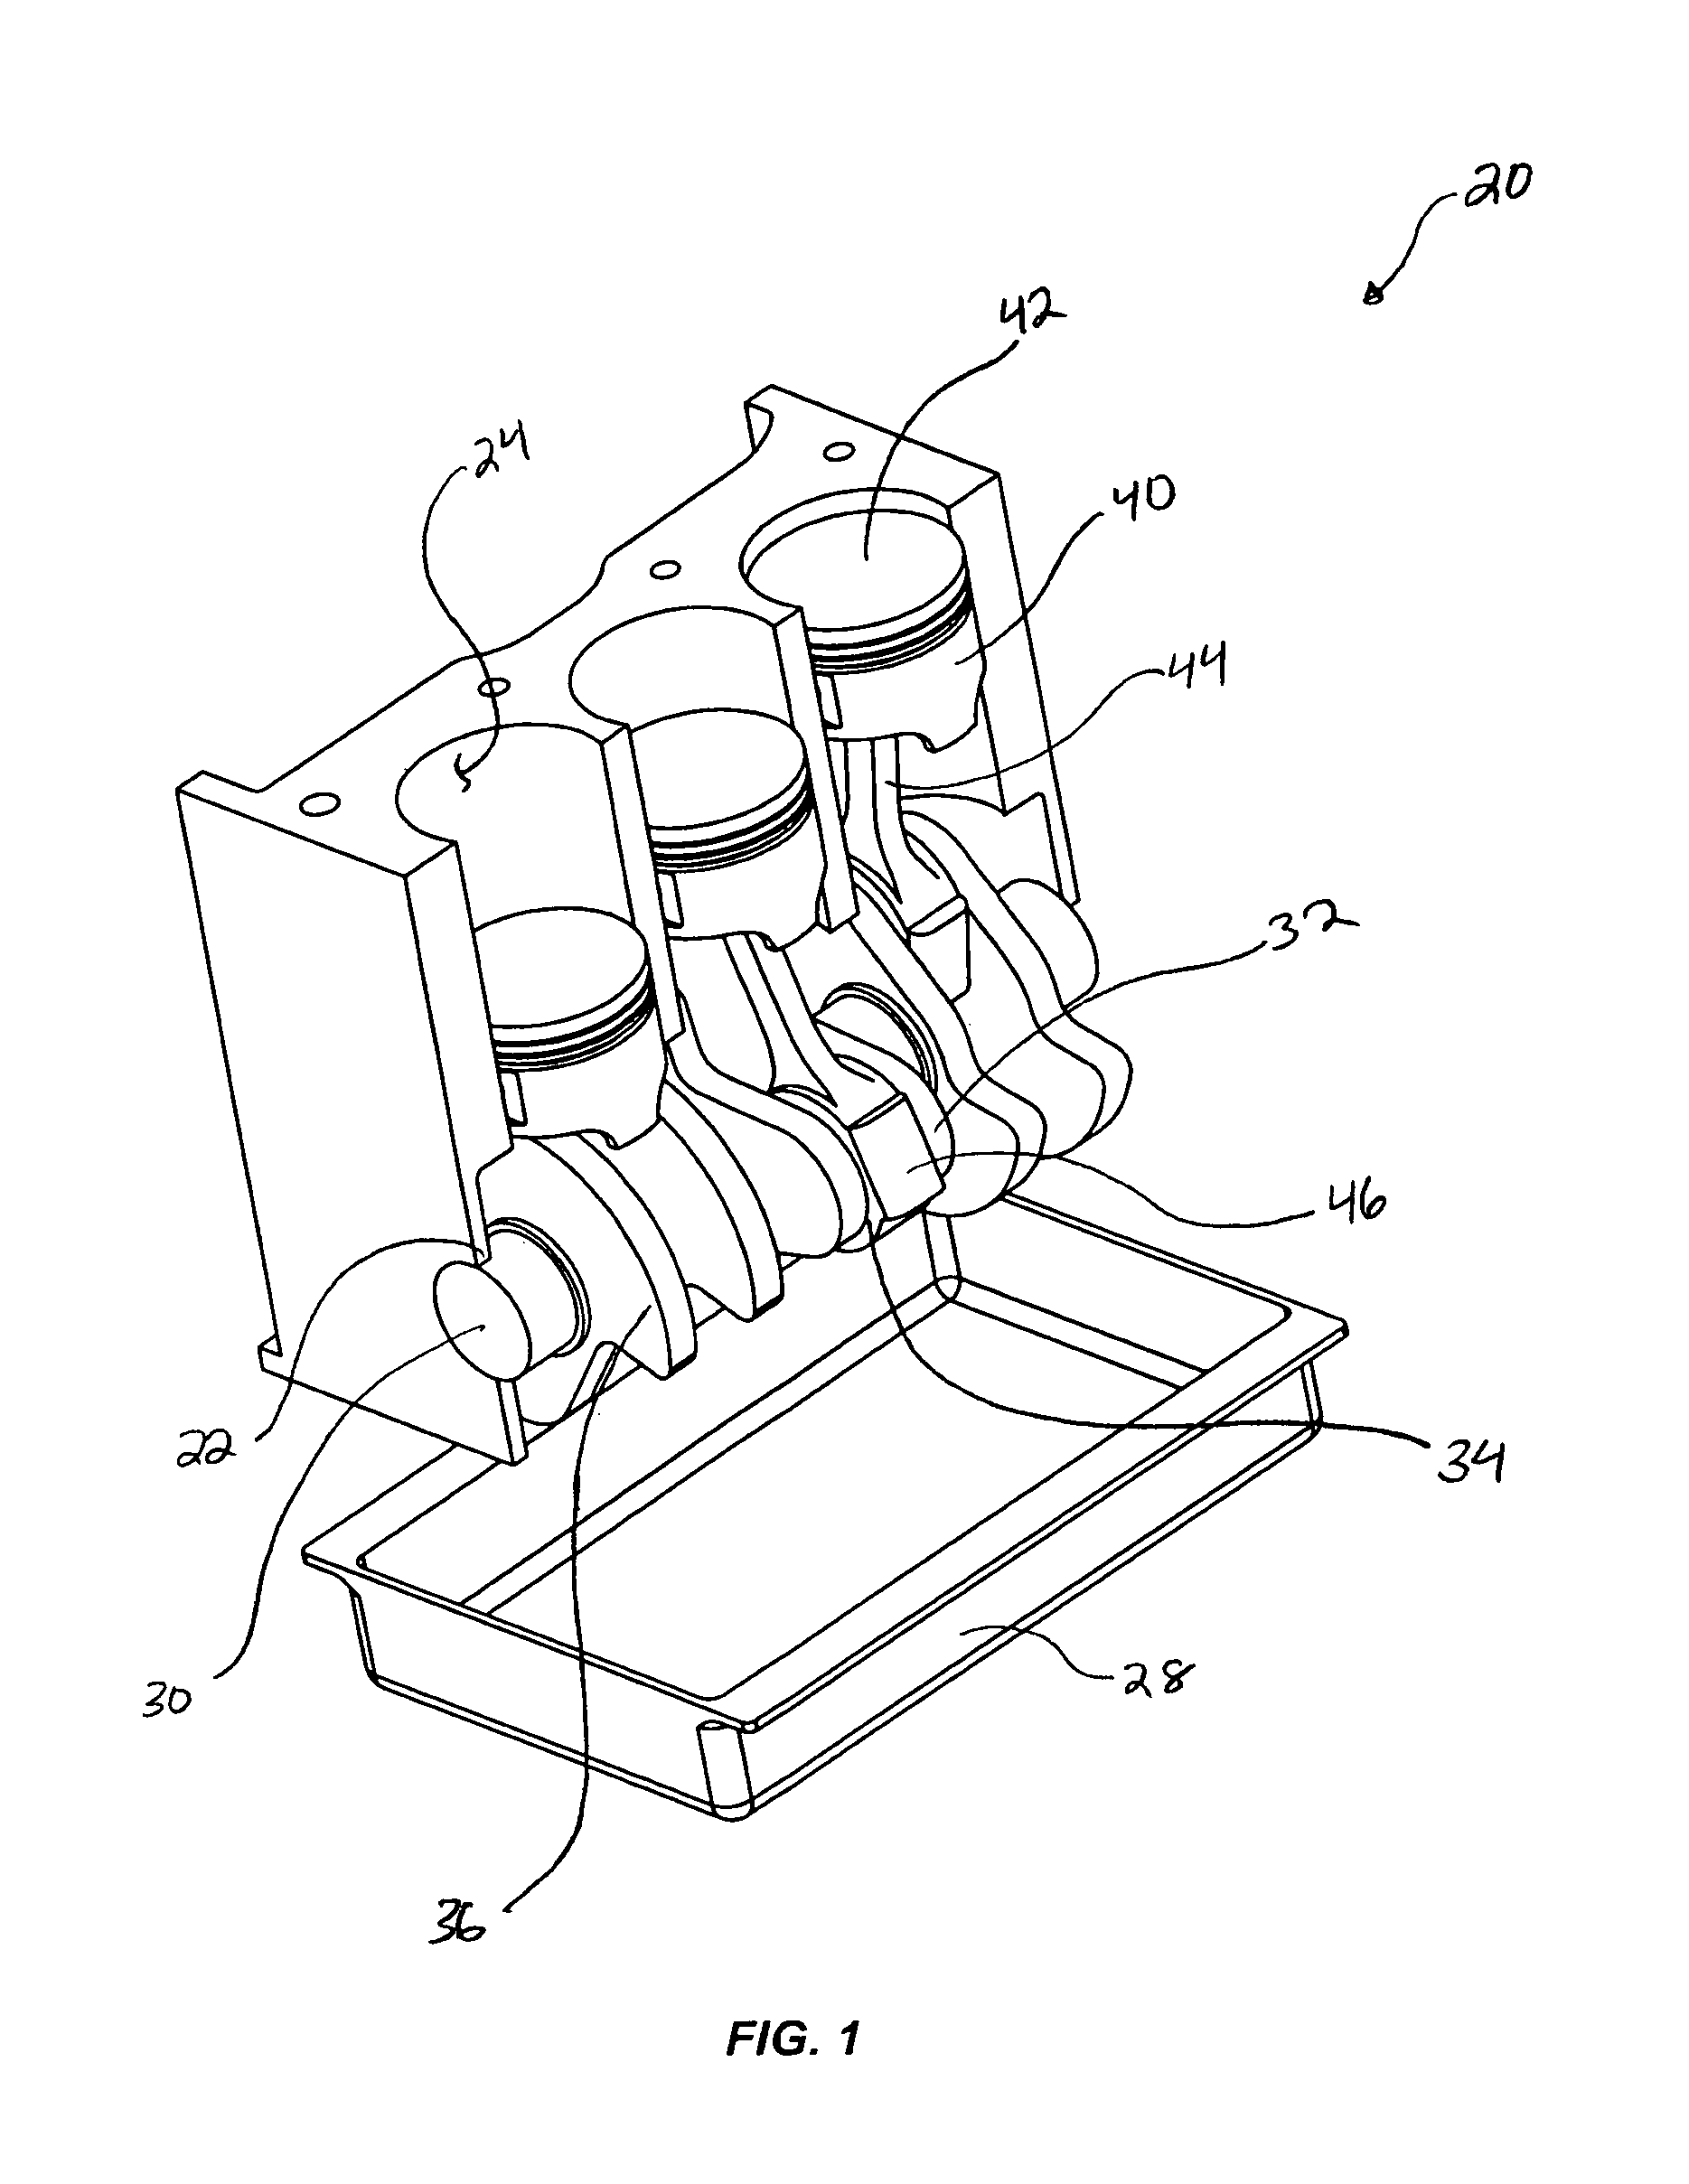 Power linkage assembly for a high efficiency internal explosion engine